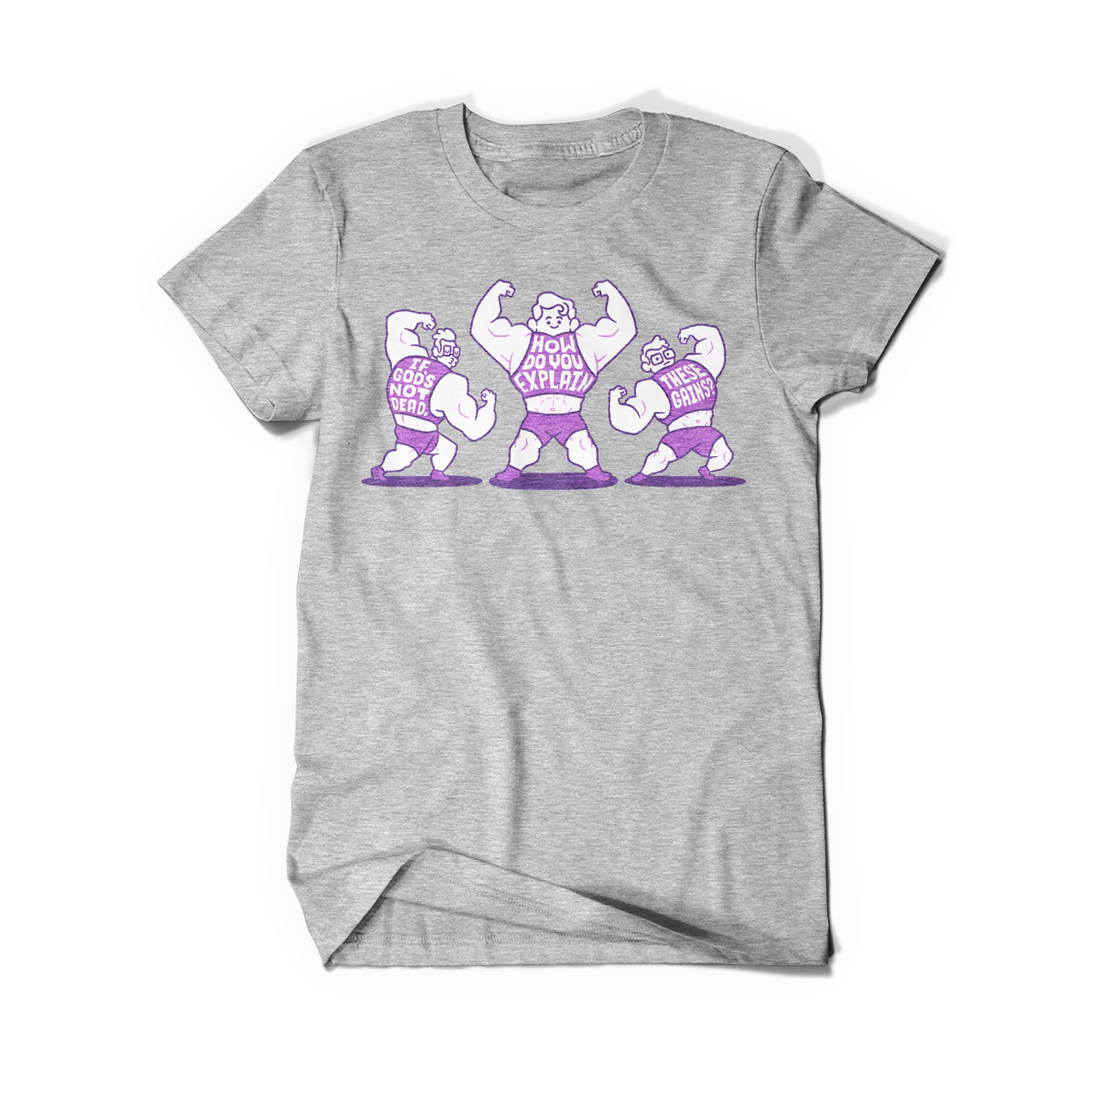 A heathered gray shirt with extremely buff McElroy brothers showing off their muscles. From left to right it’s Travis, Justin, and Griffin. They are wearing purple muscle shirts, shorts, and shoes. Their shirts say, “If God’s not dead, how do you explain these gains?” 